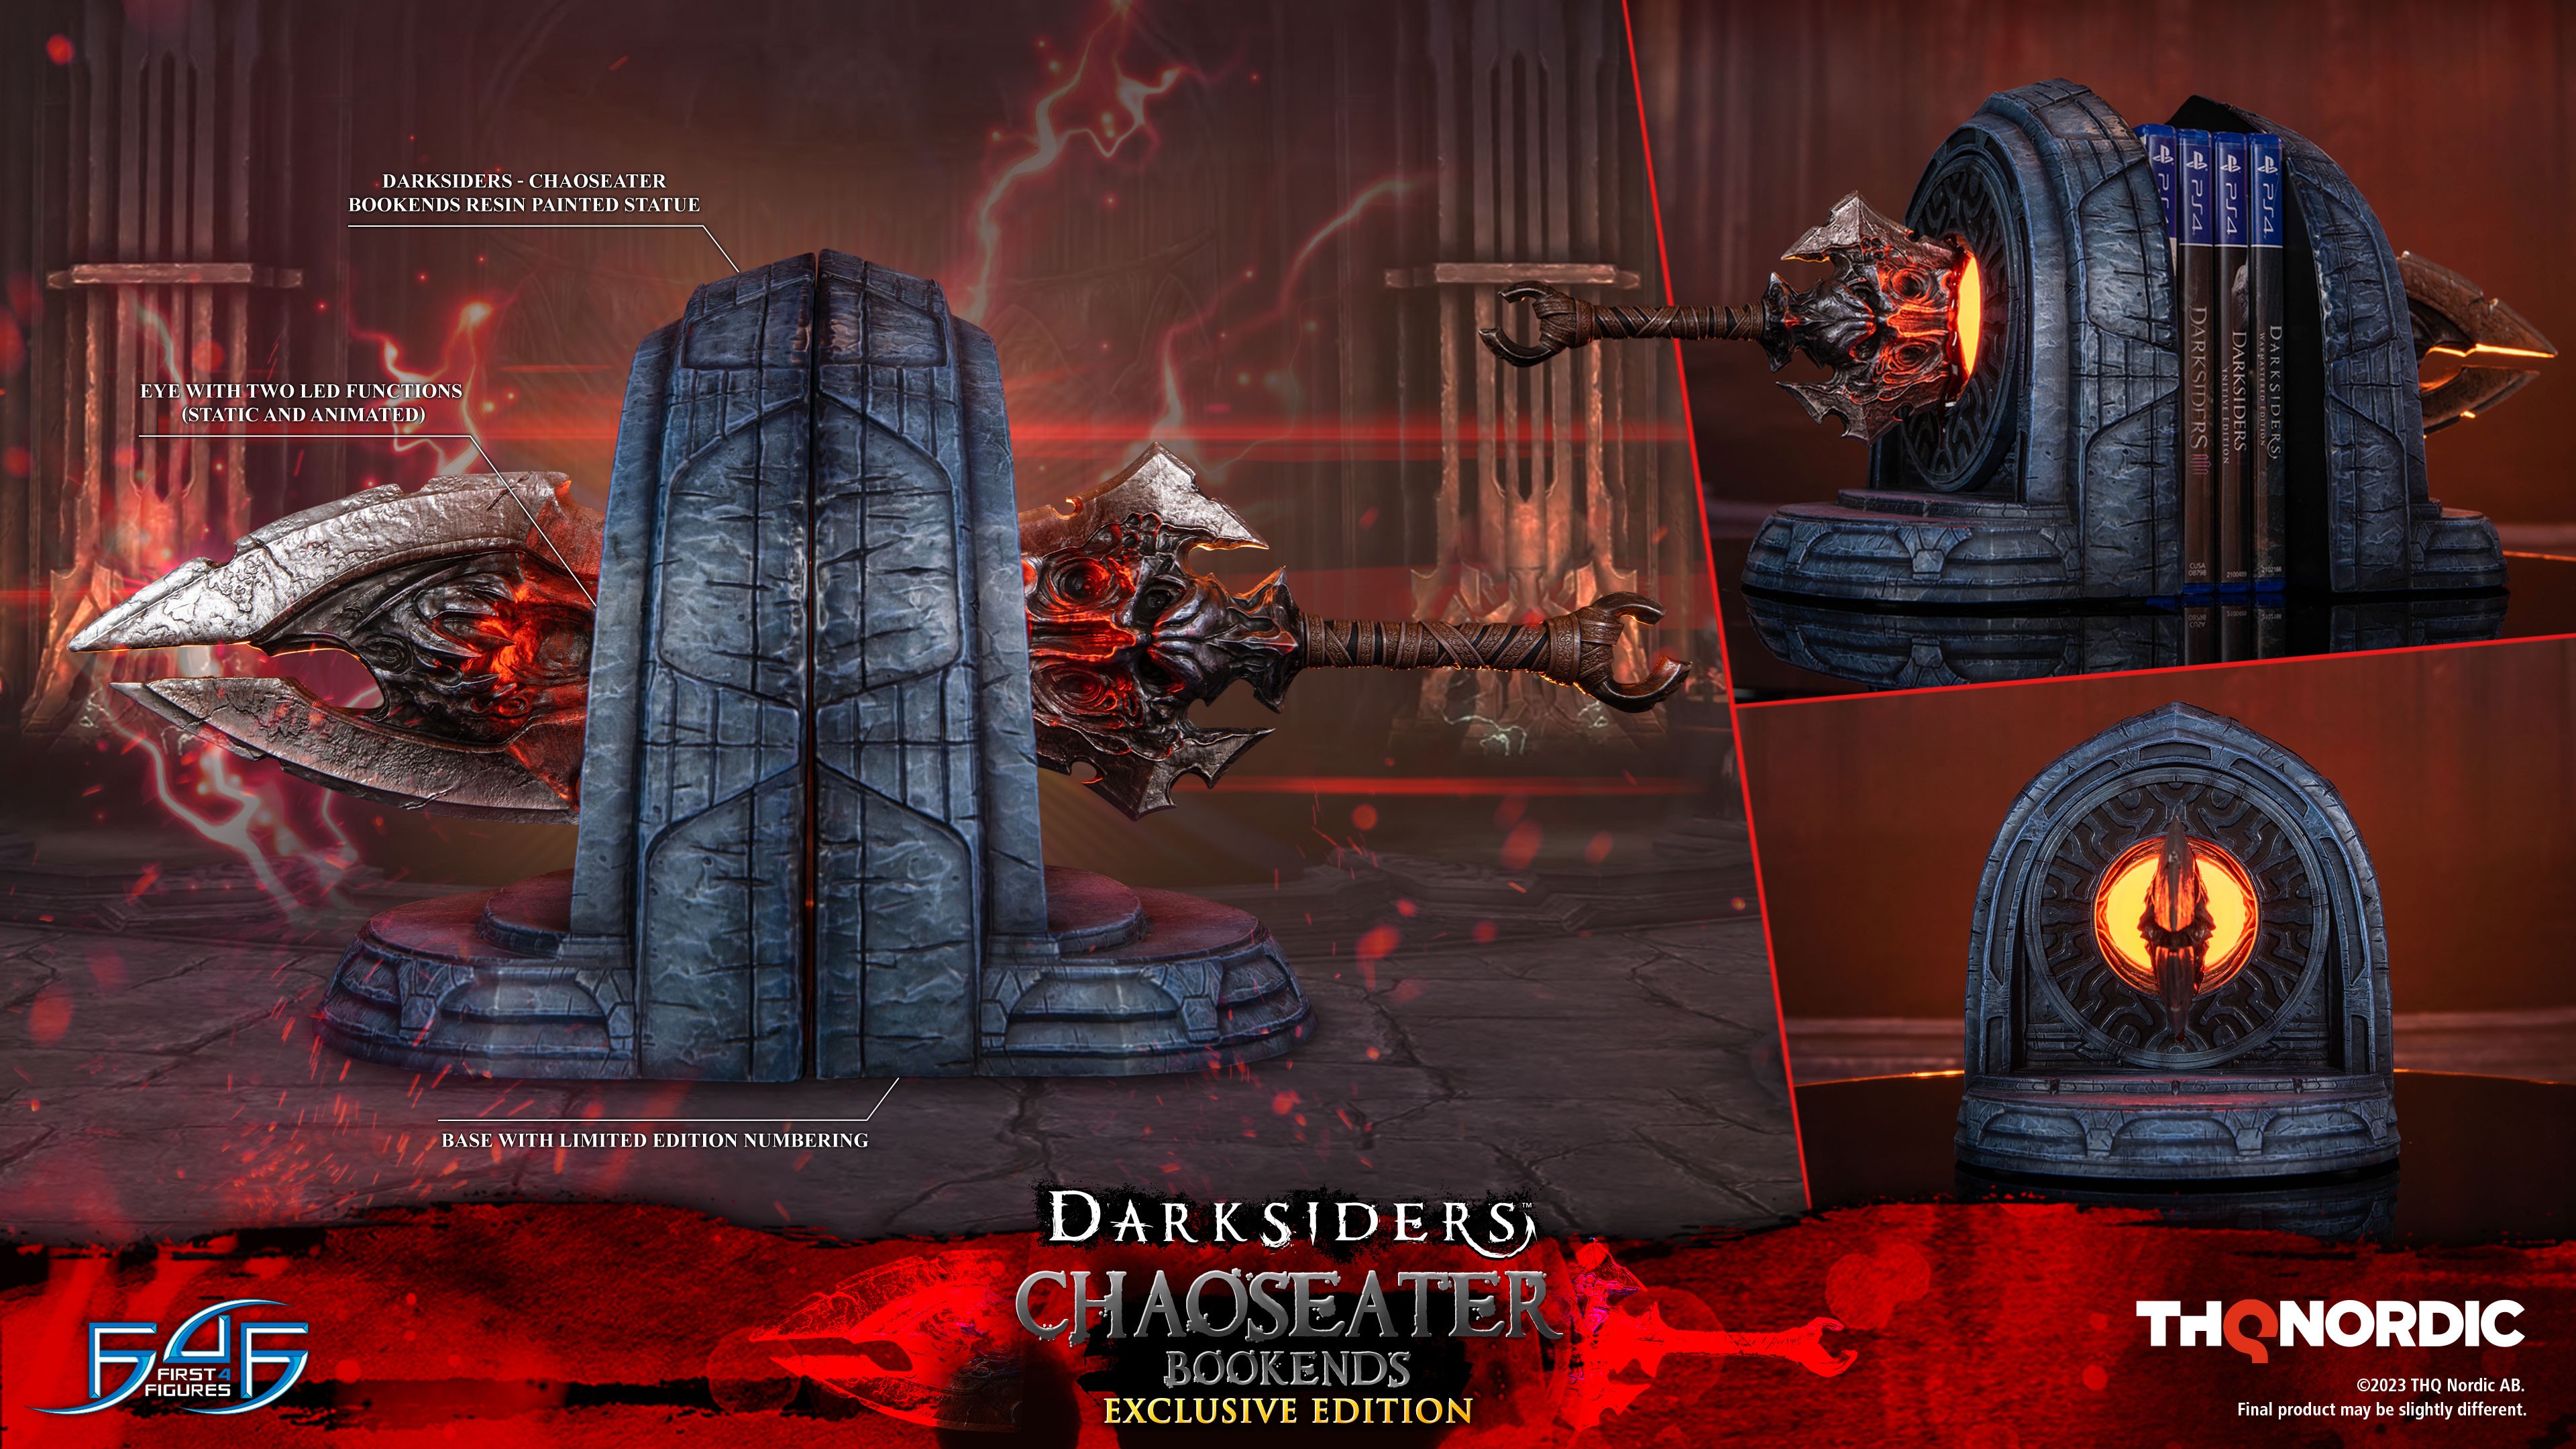 Darksiders - Chaoseater Bookends (Exclusive Edition)